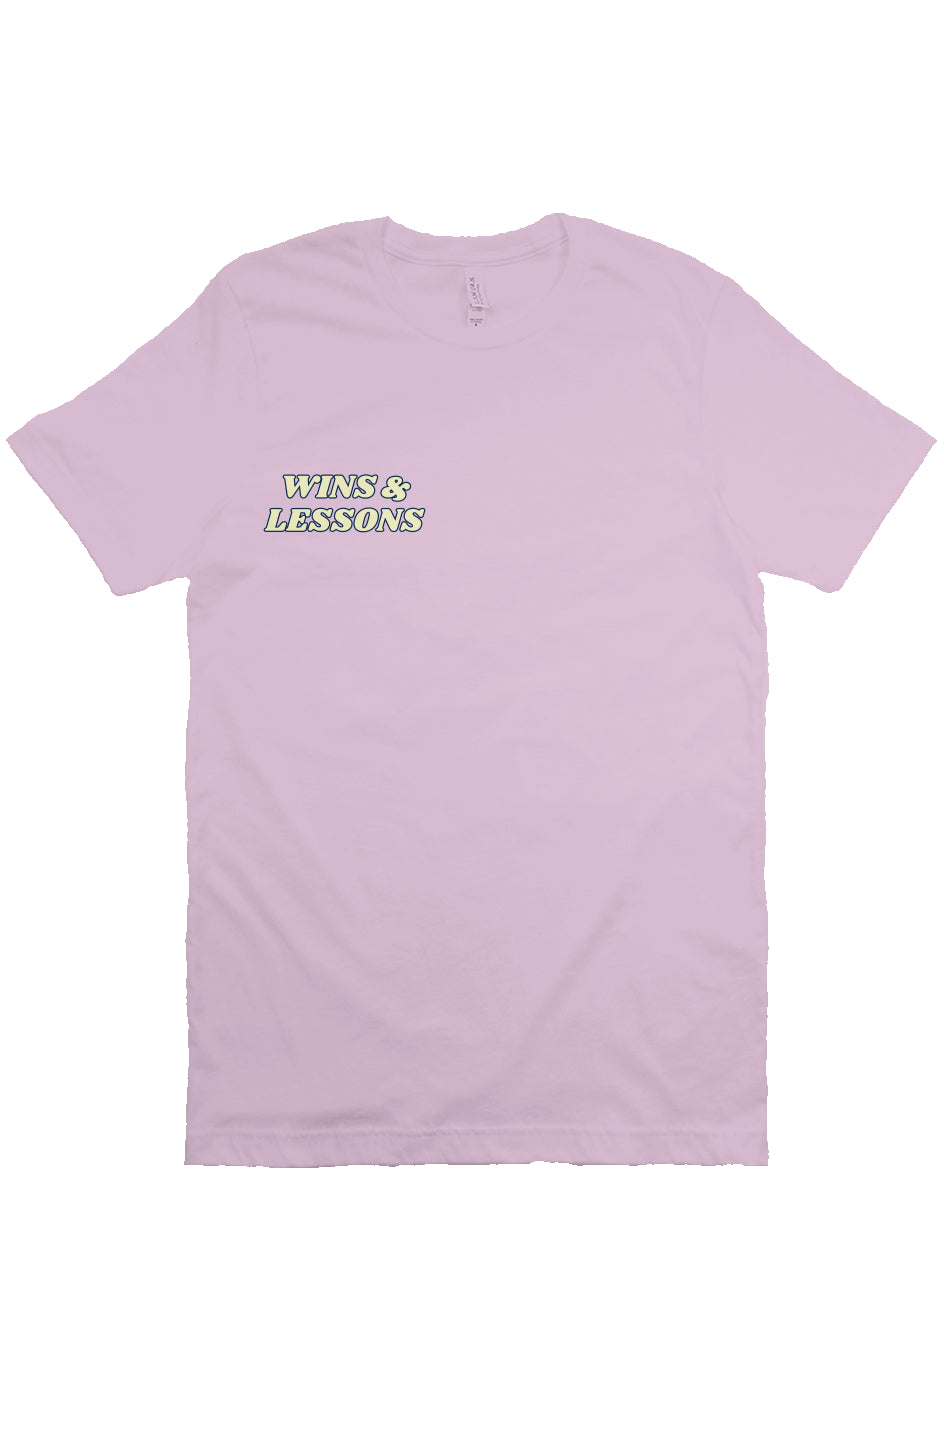 Wins + Lessons Lavender Tee 